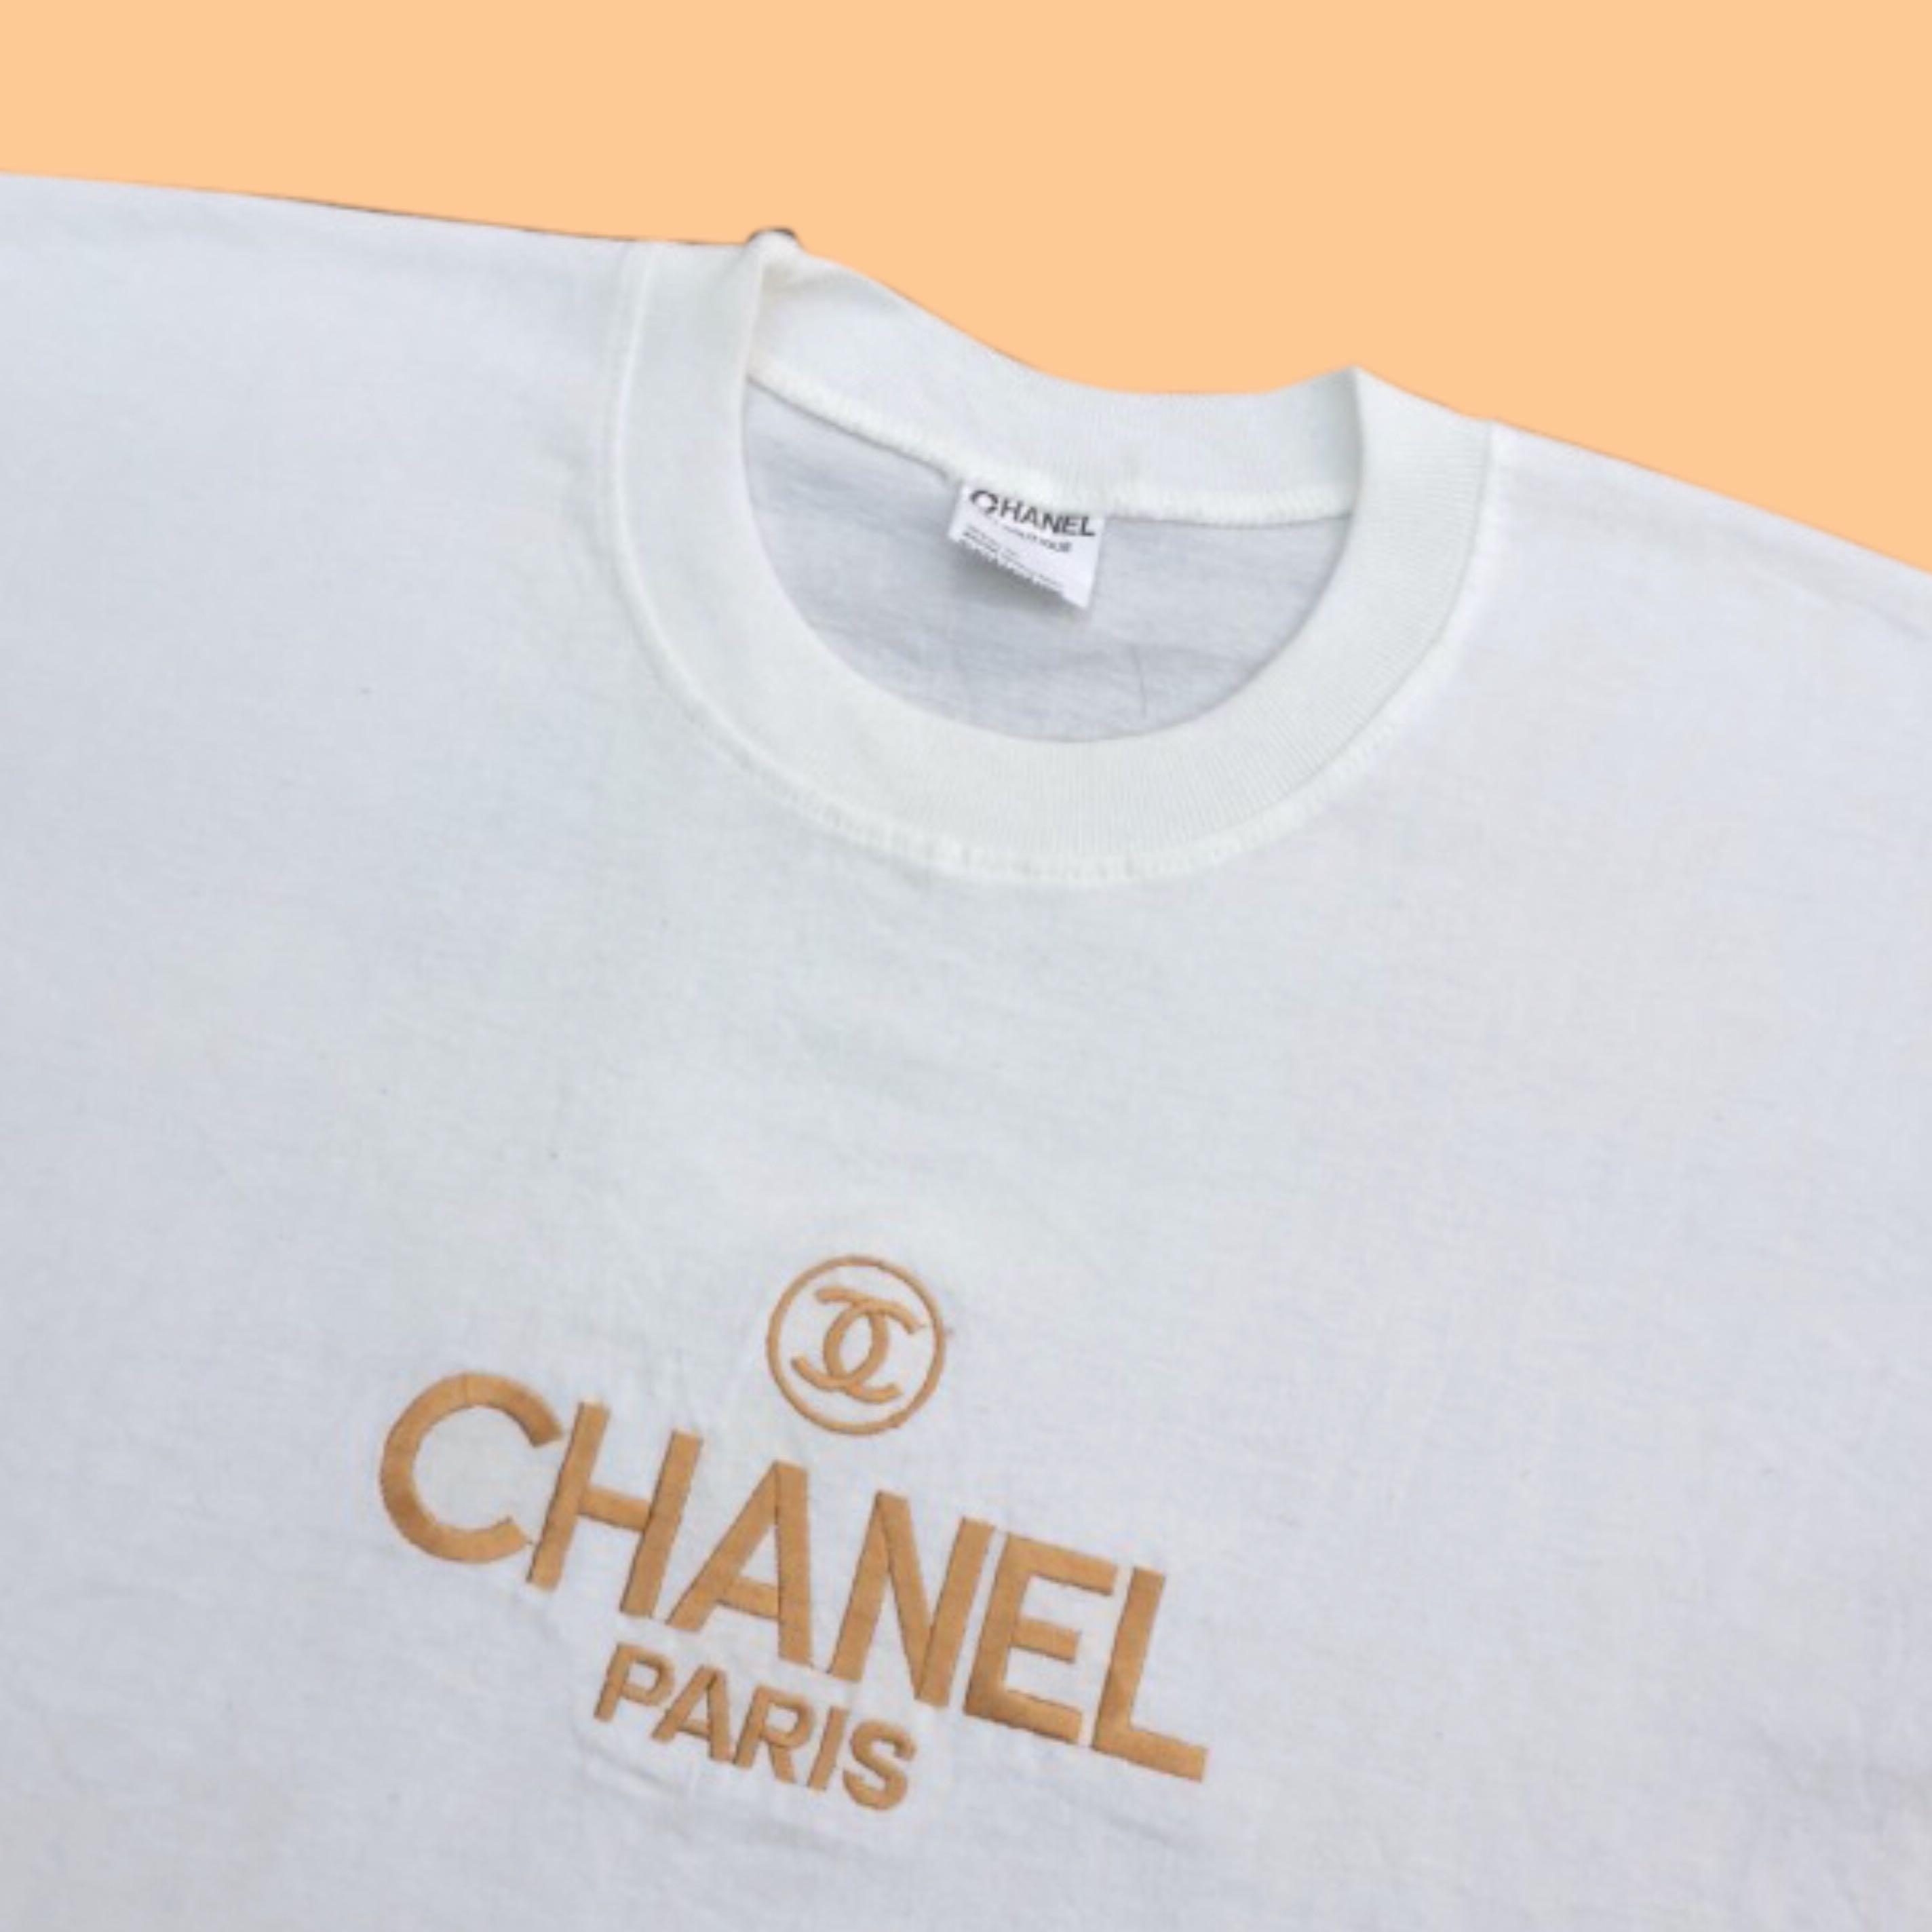 Vintage Chanel embroidered tee